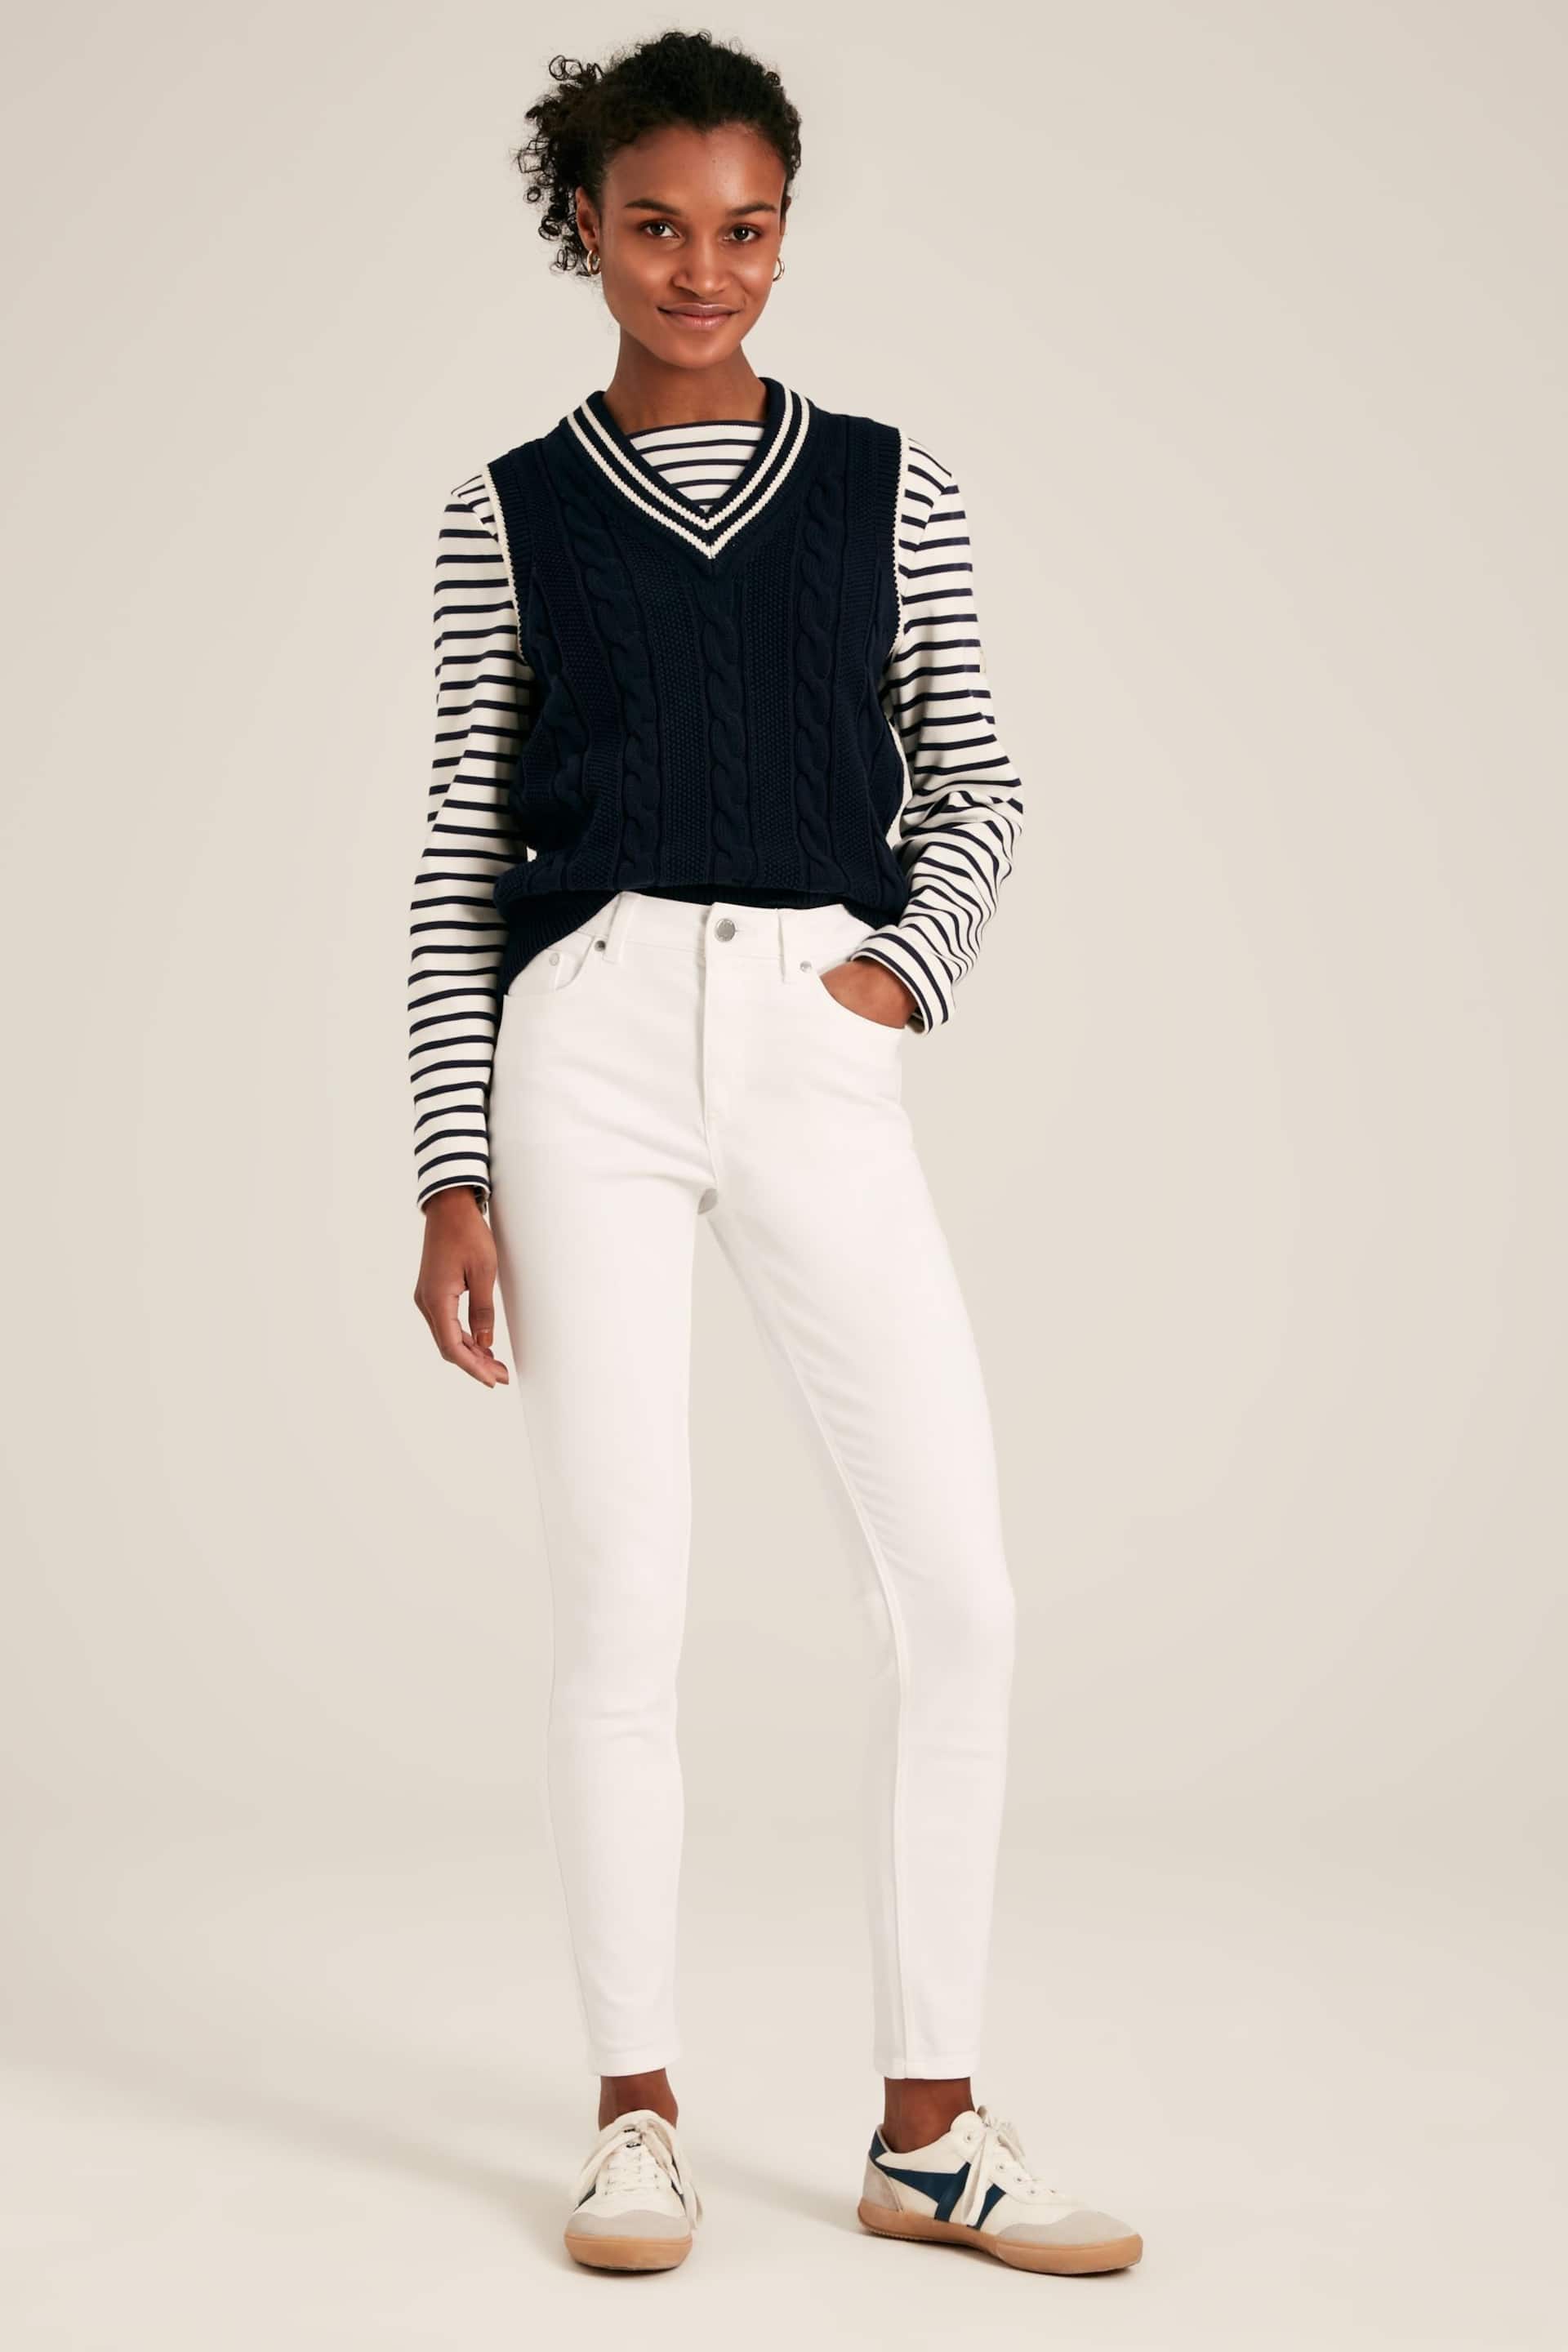 Joules White Jeans - Image 3 of 6